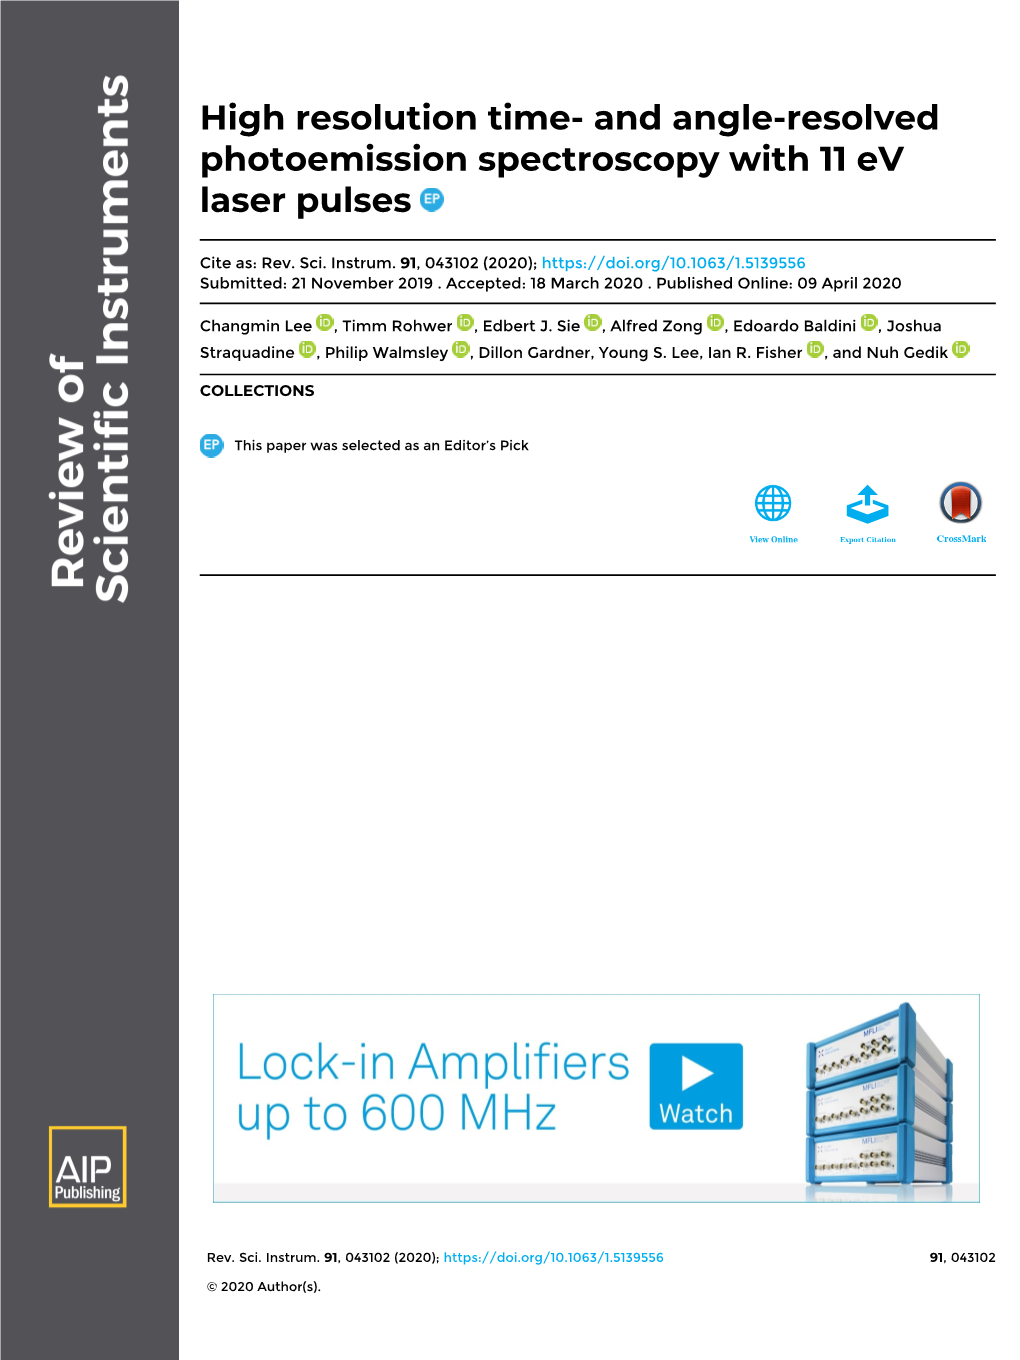 And Angle-Resolved Photoemission Spectroscopy with 11 Ev Laser Pulses